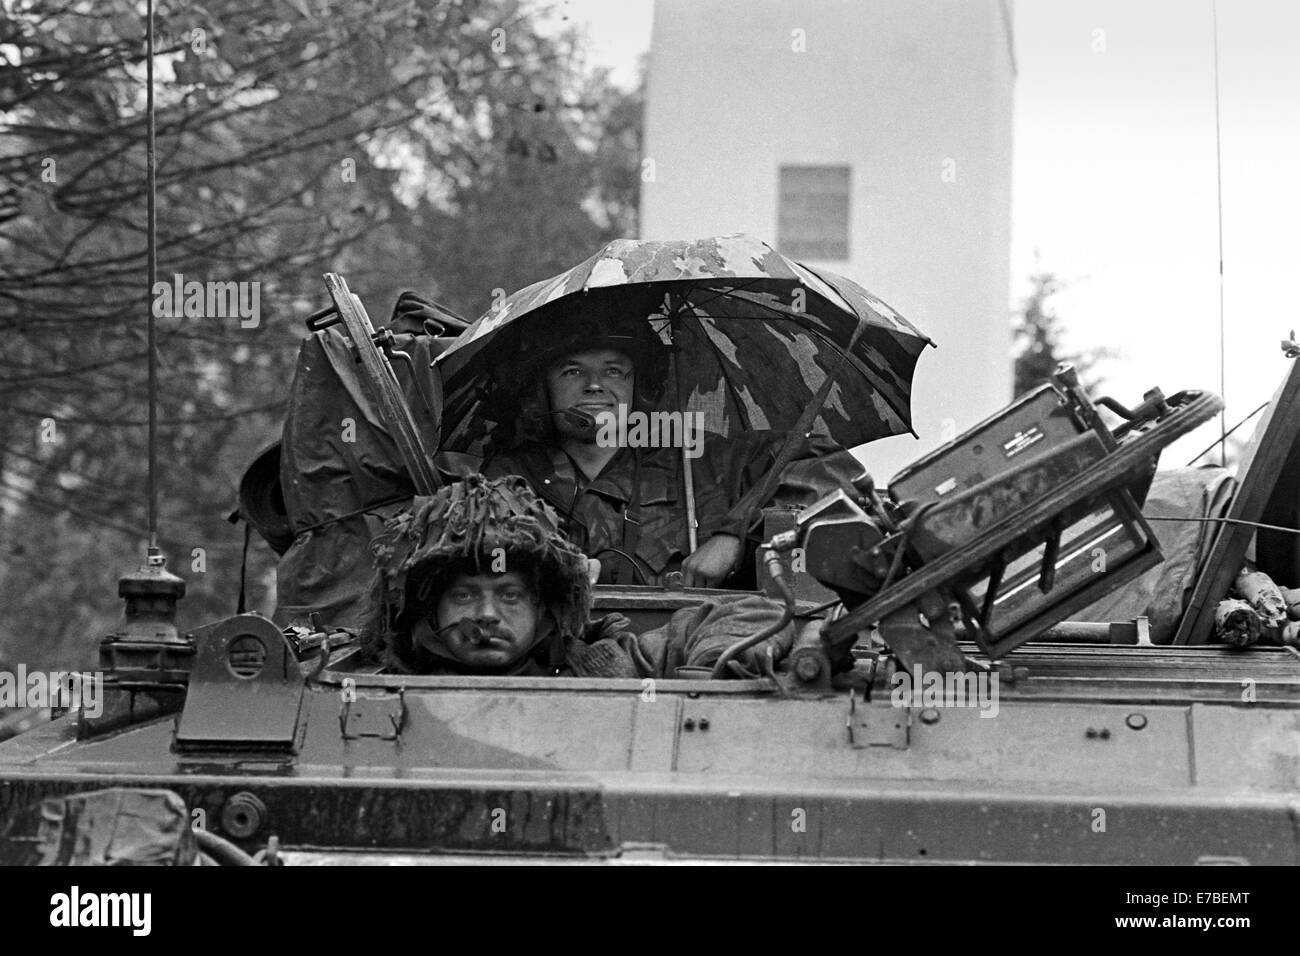 NATO exercises in Germany, British Army soldiers on an armored vehicle (September 1986). Stock Photo